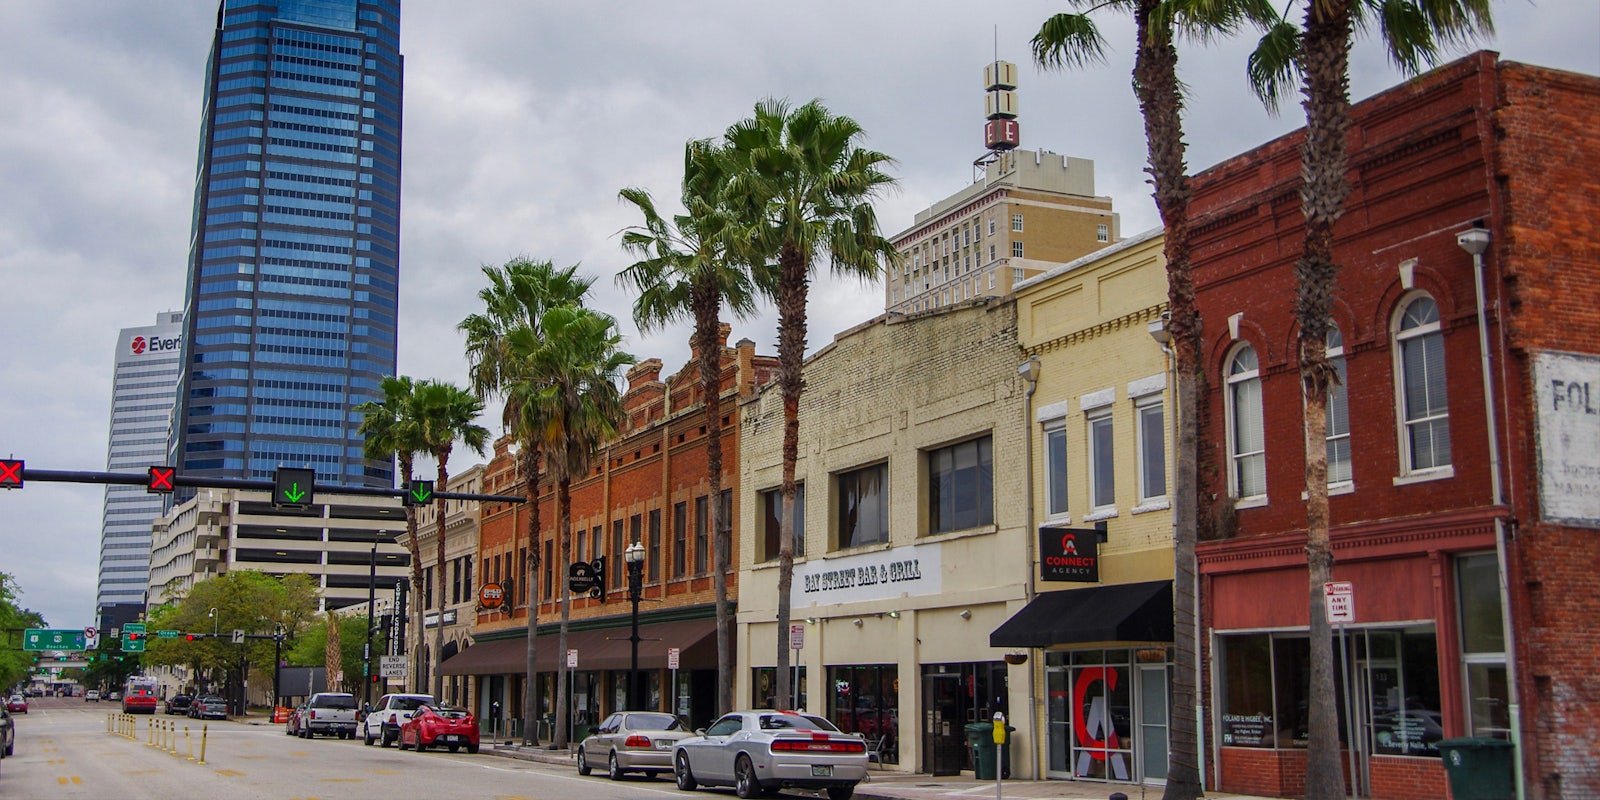 Jacksonville Florida architecture and palm trees with street